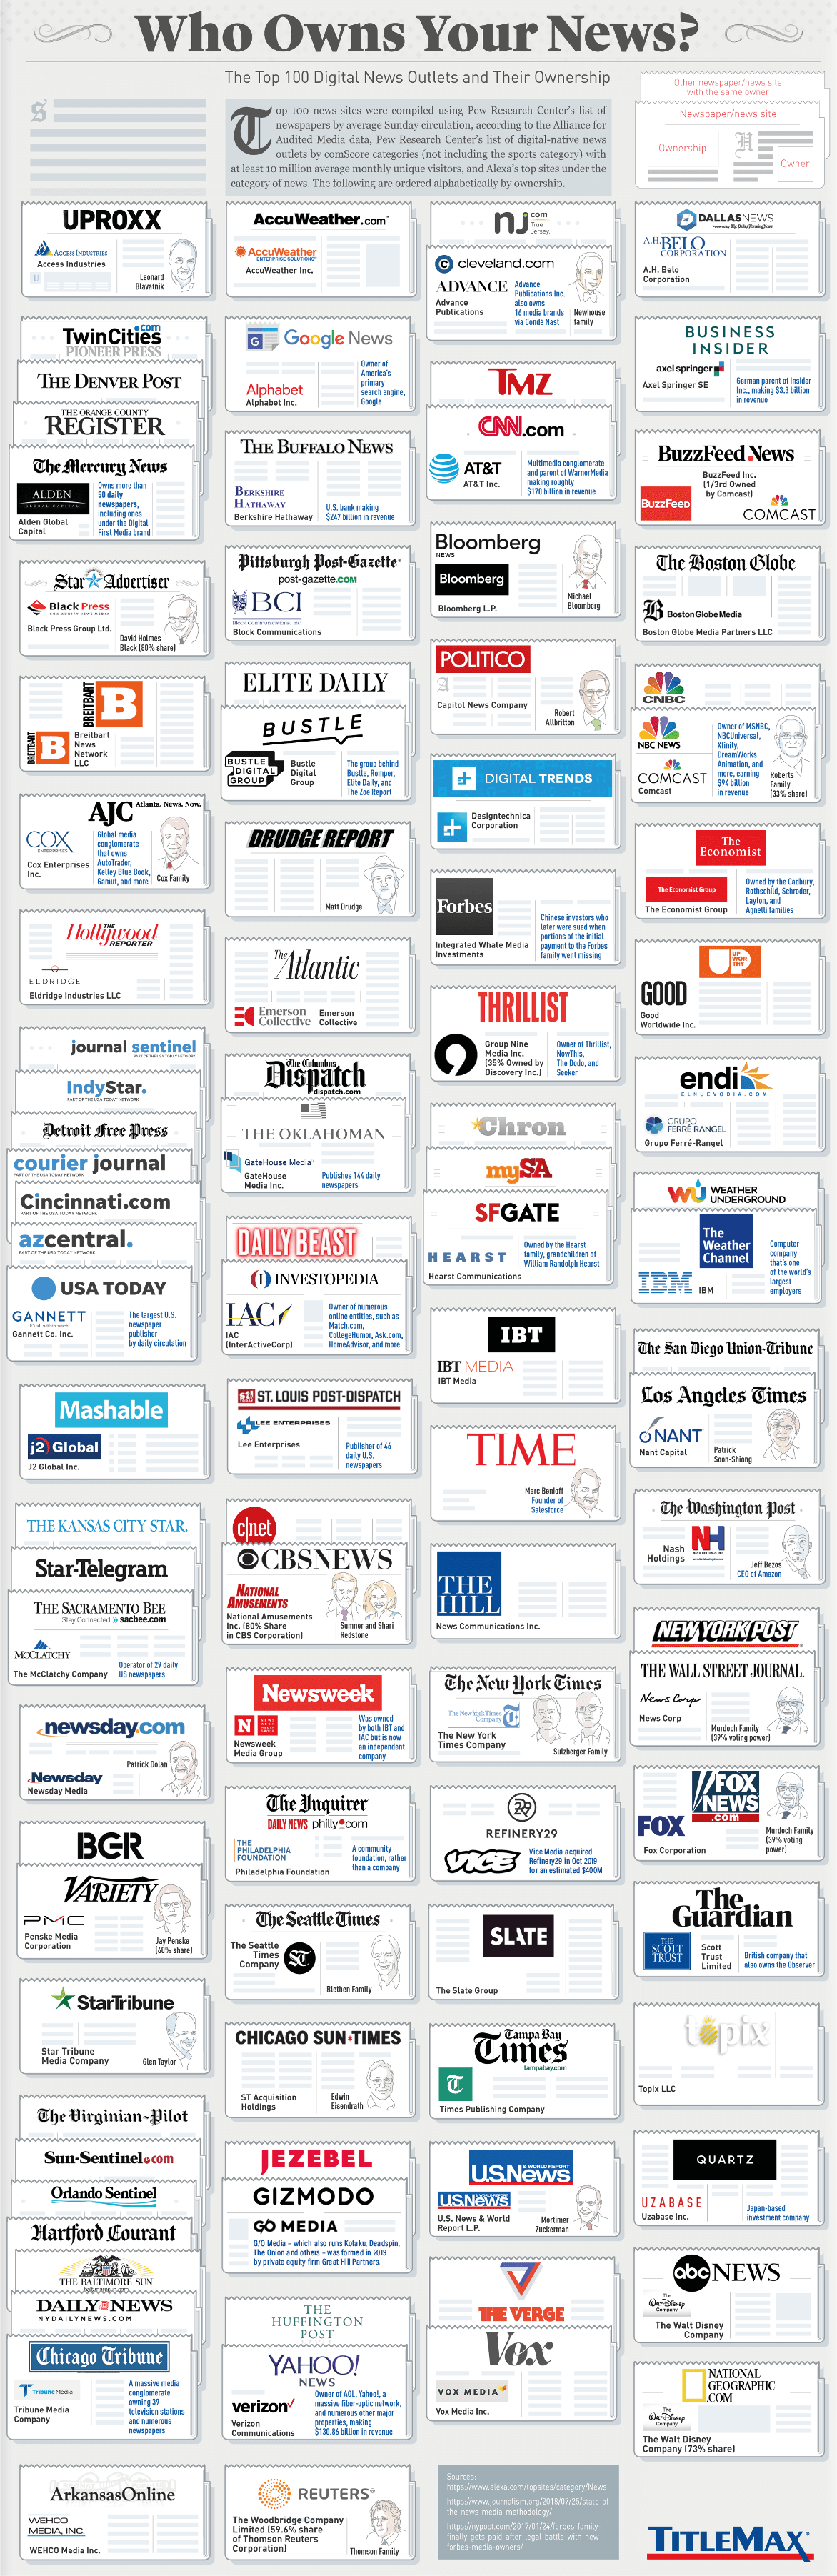 Who owns your favorite news site